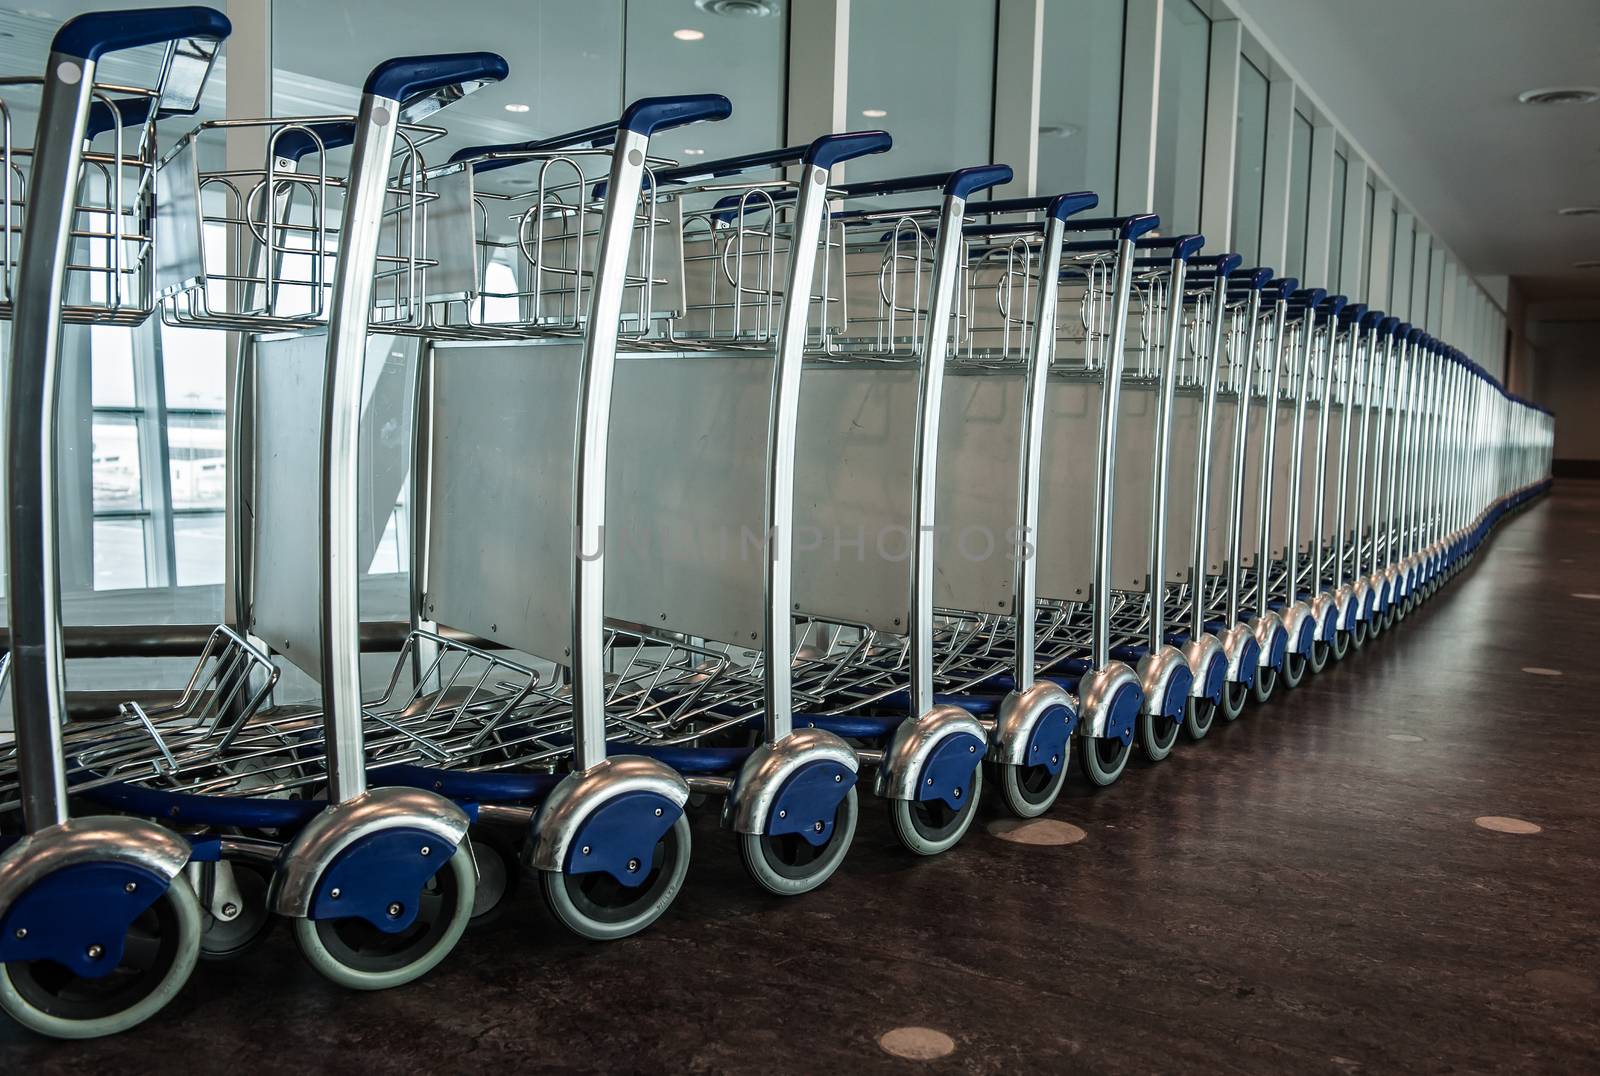 Airport trolleys queued one by one.